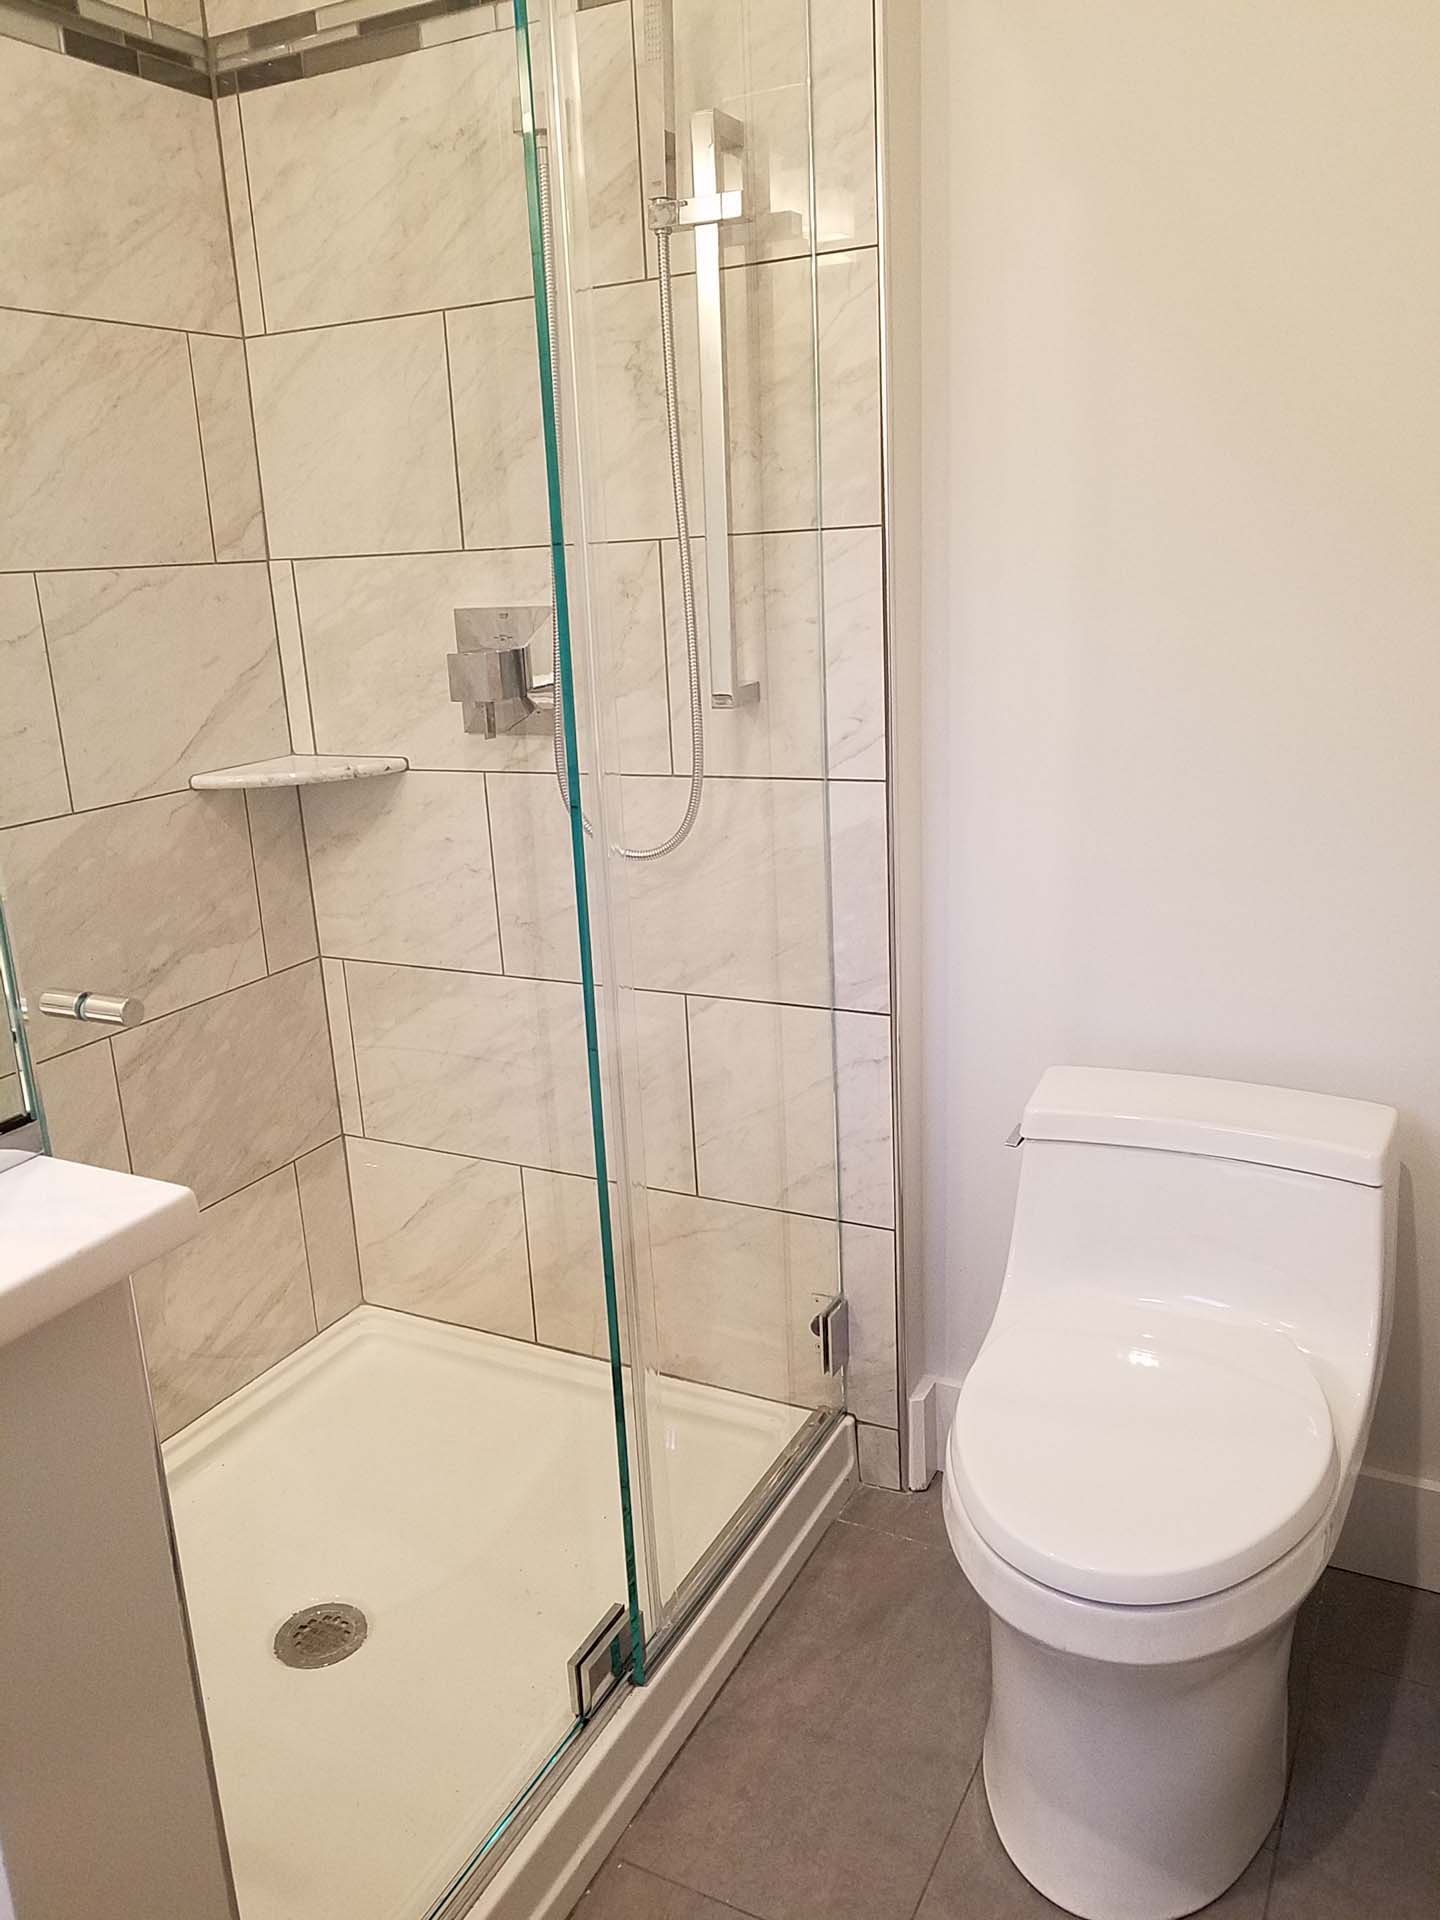 Newly installed toilet and walk in shower